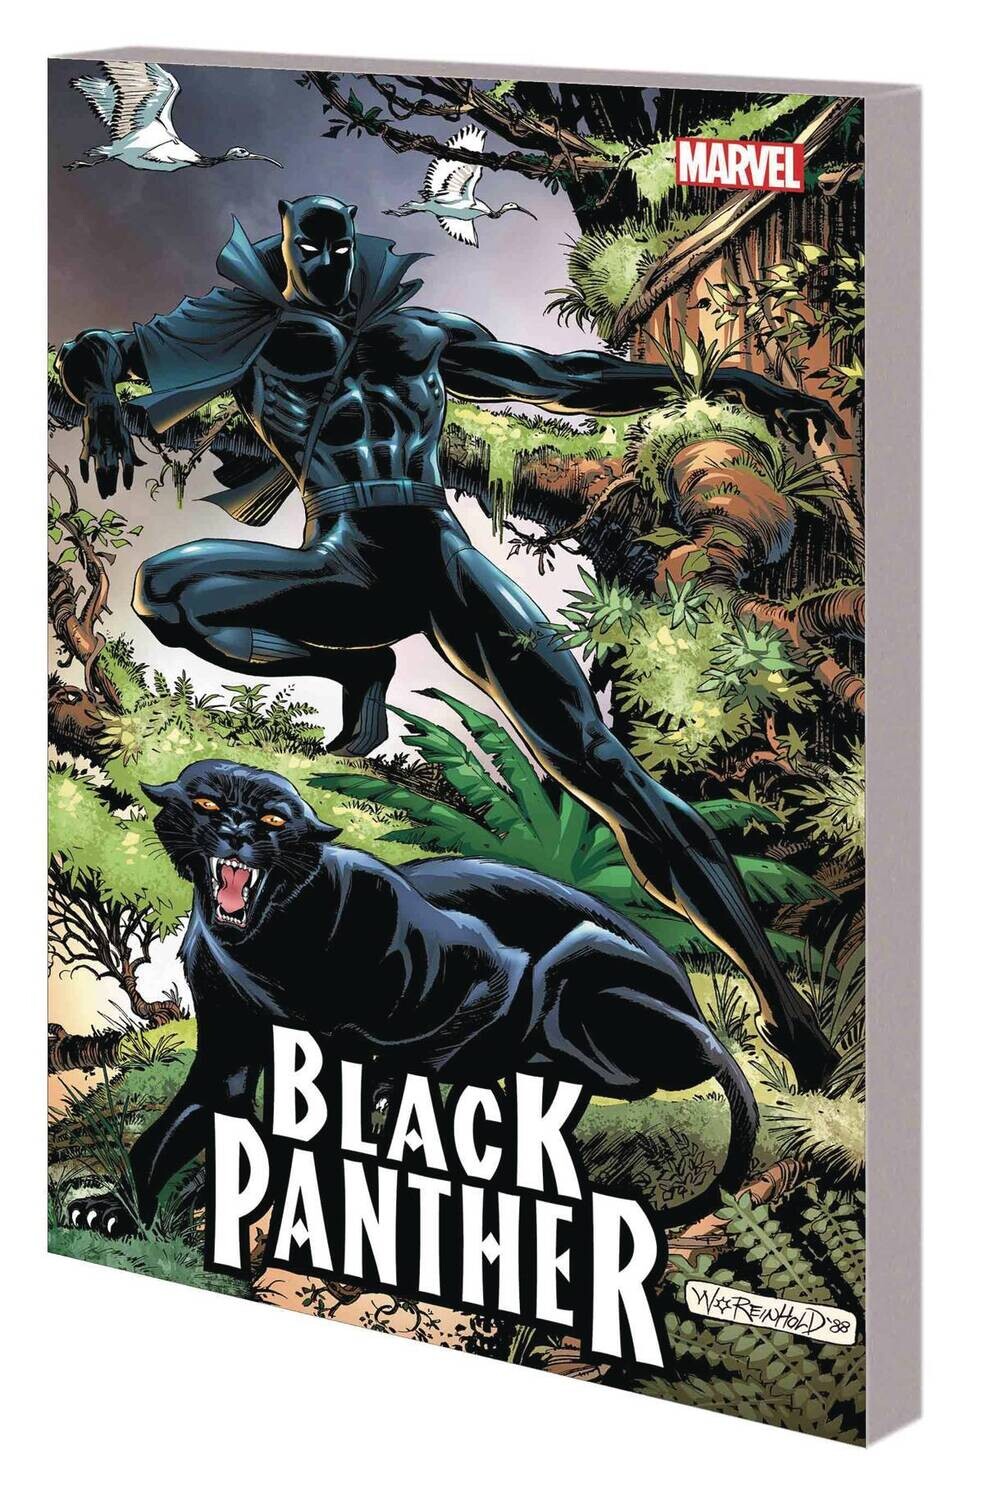 Black Panther Panthers Quest